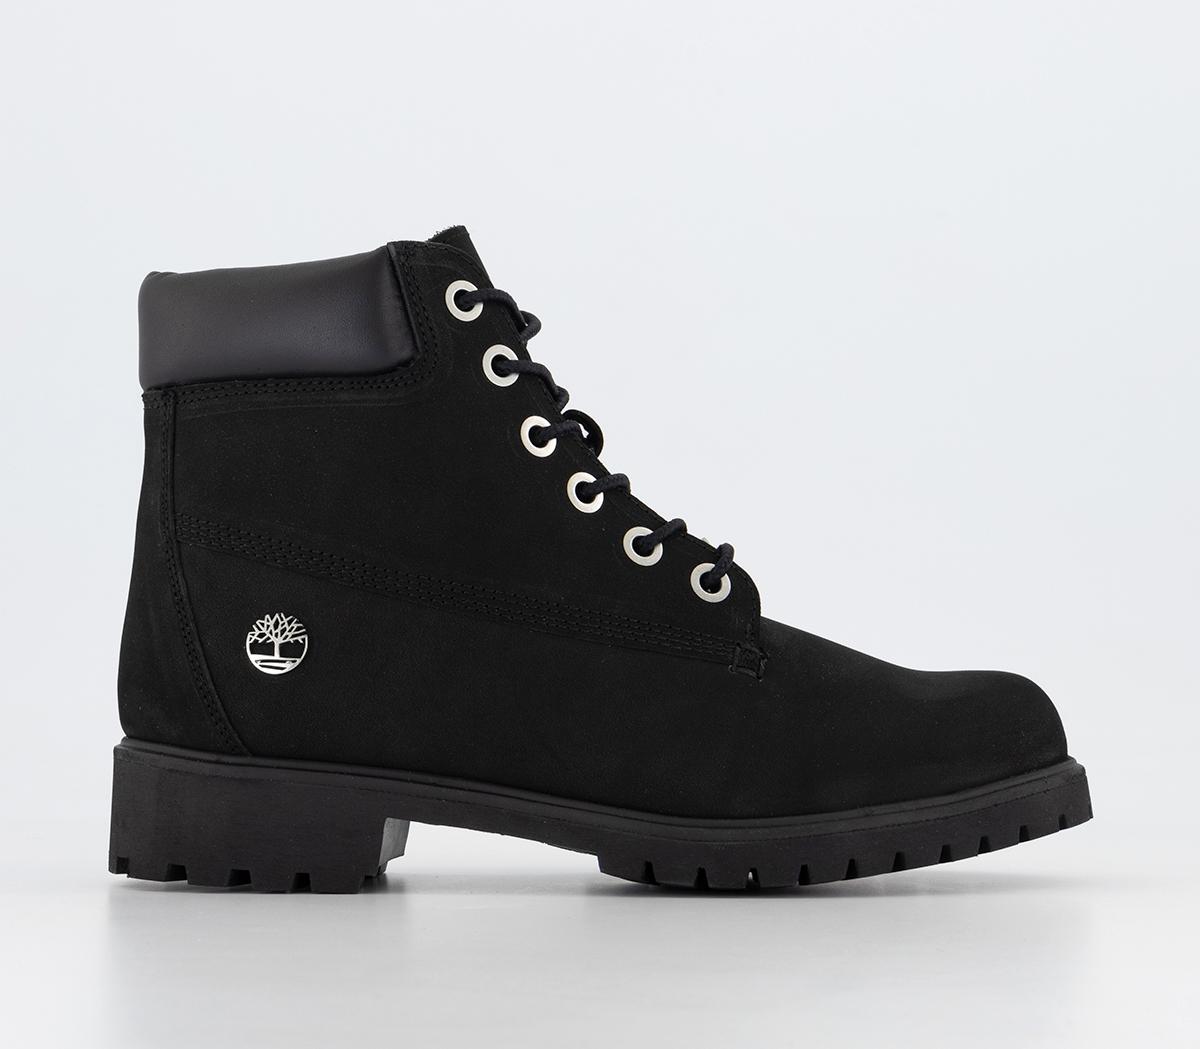 Timberland Timberland Lyonsdale 6 Inch Boots Black - Women's Ankle Boots